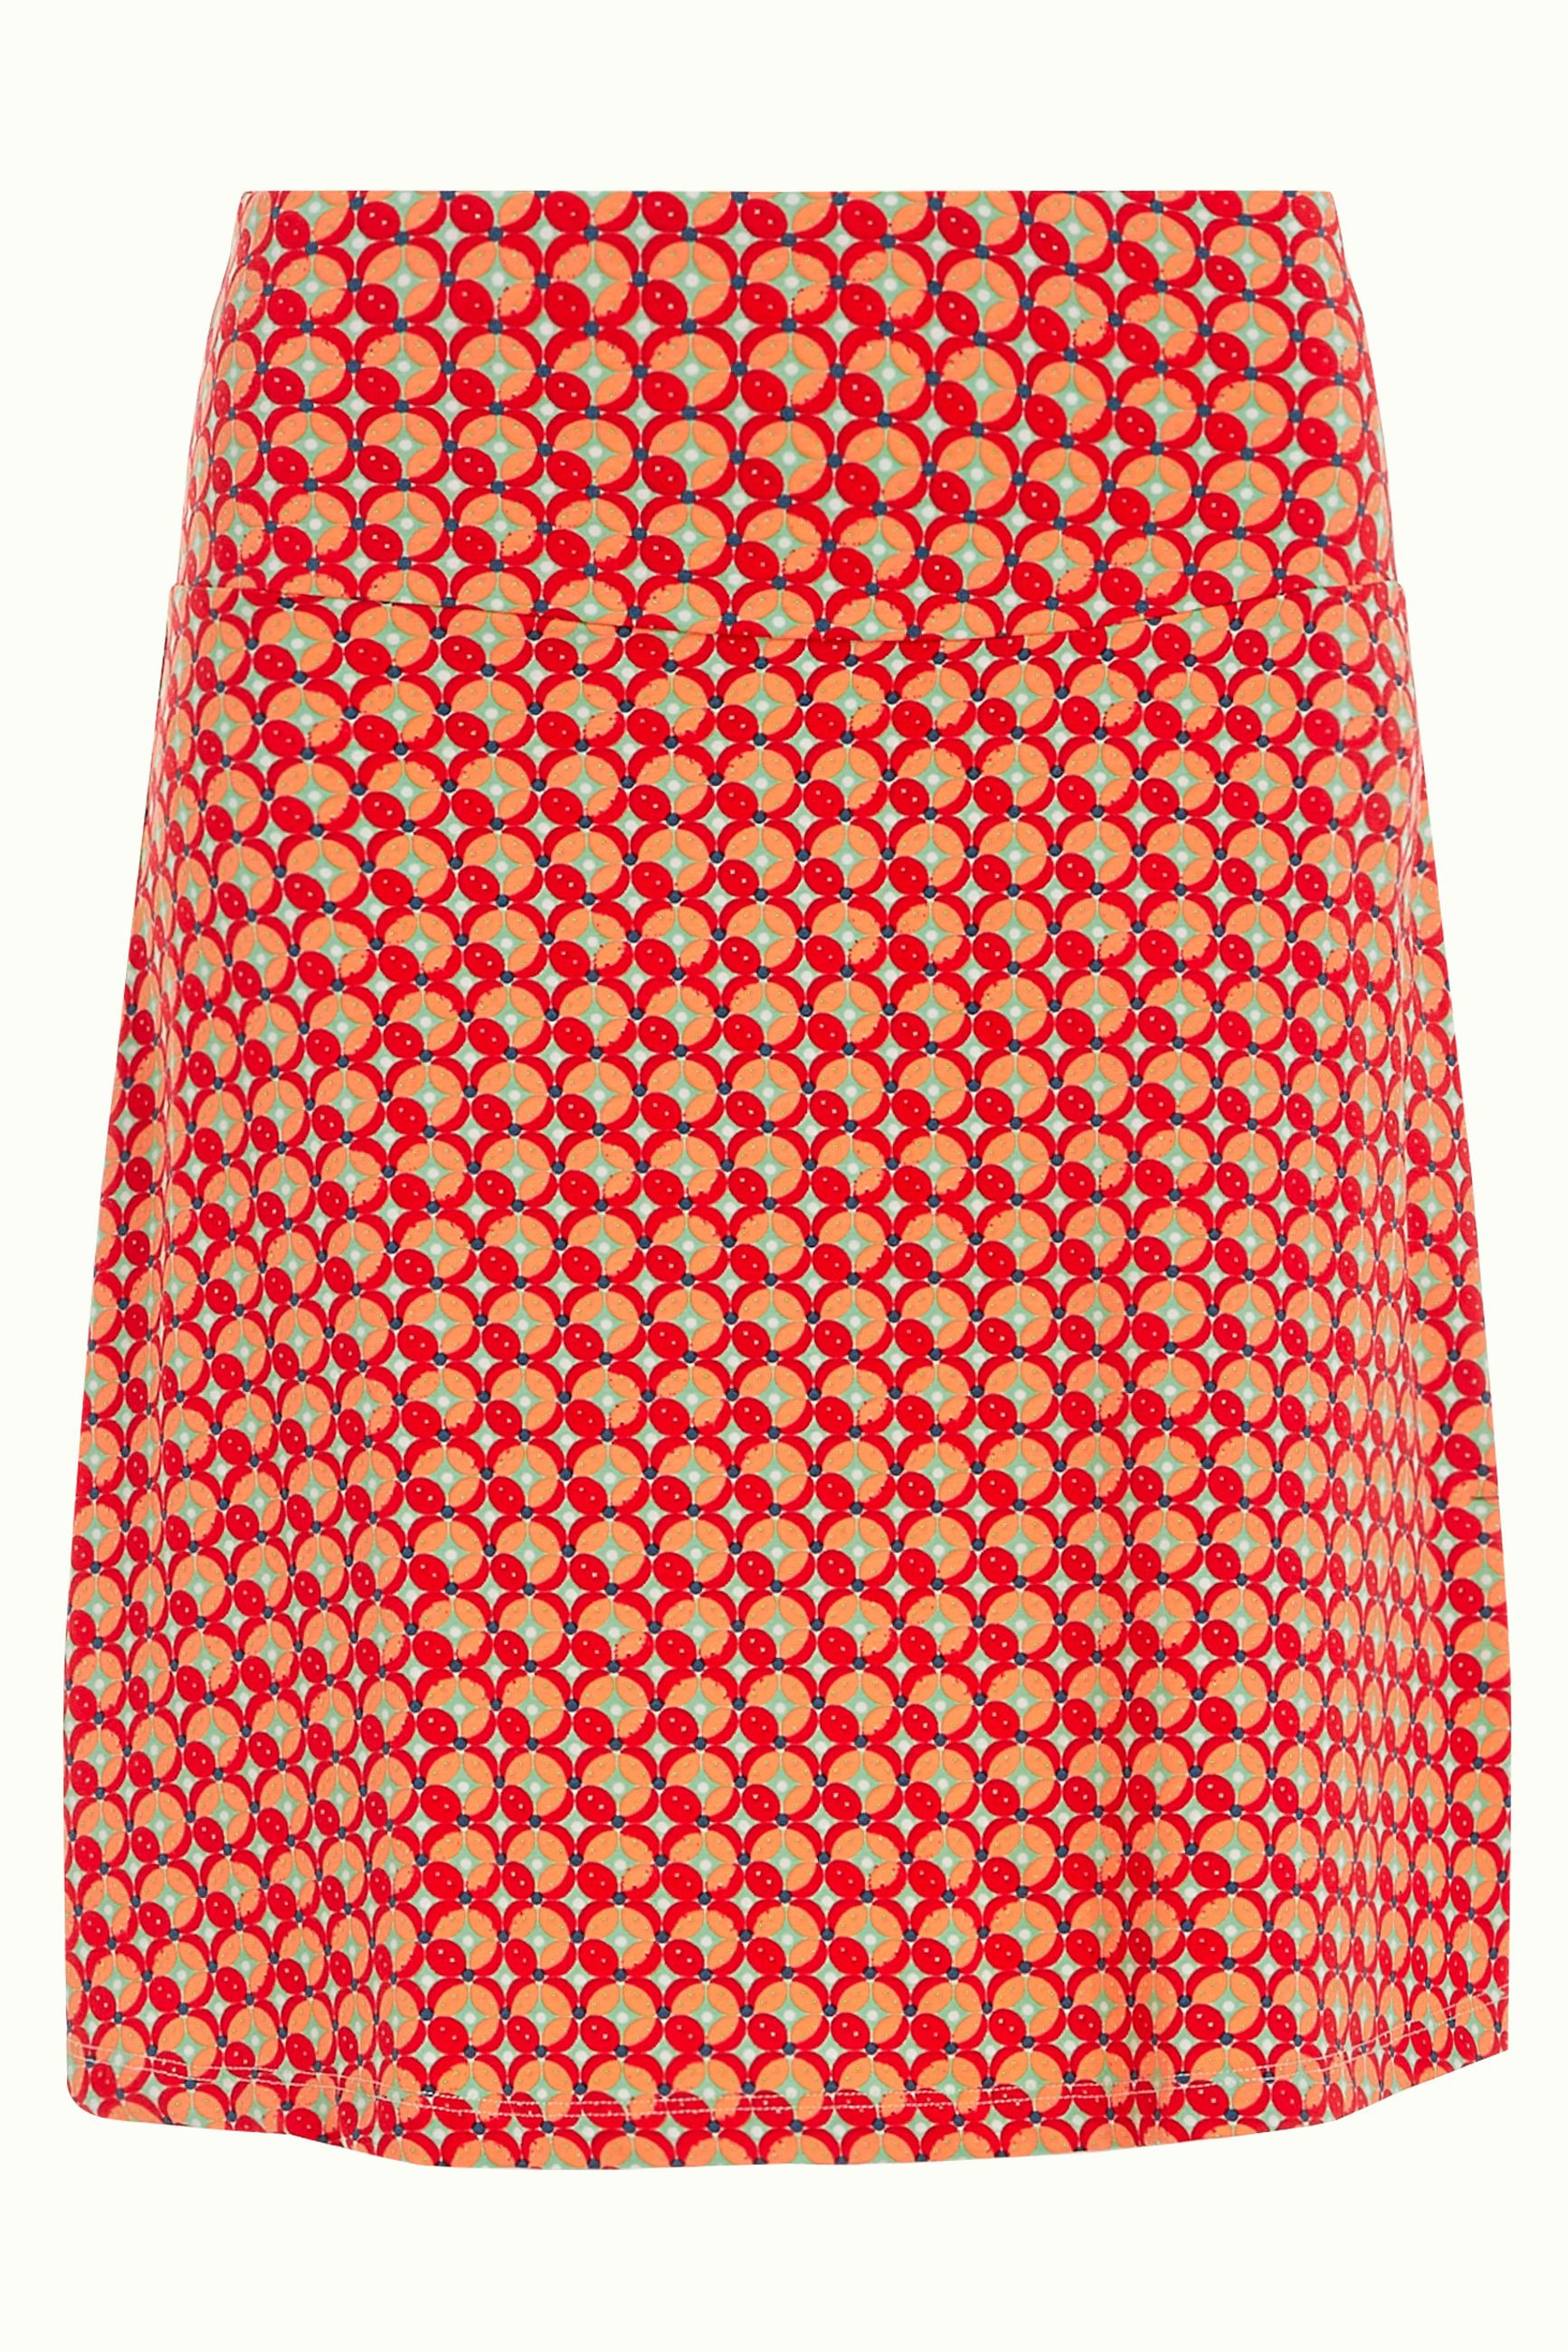 King Louie Border Skirt Rowe, Farbe: Fiery Red